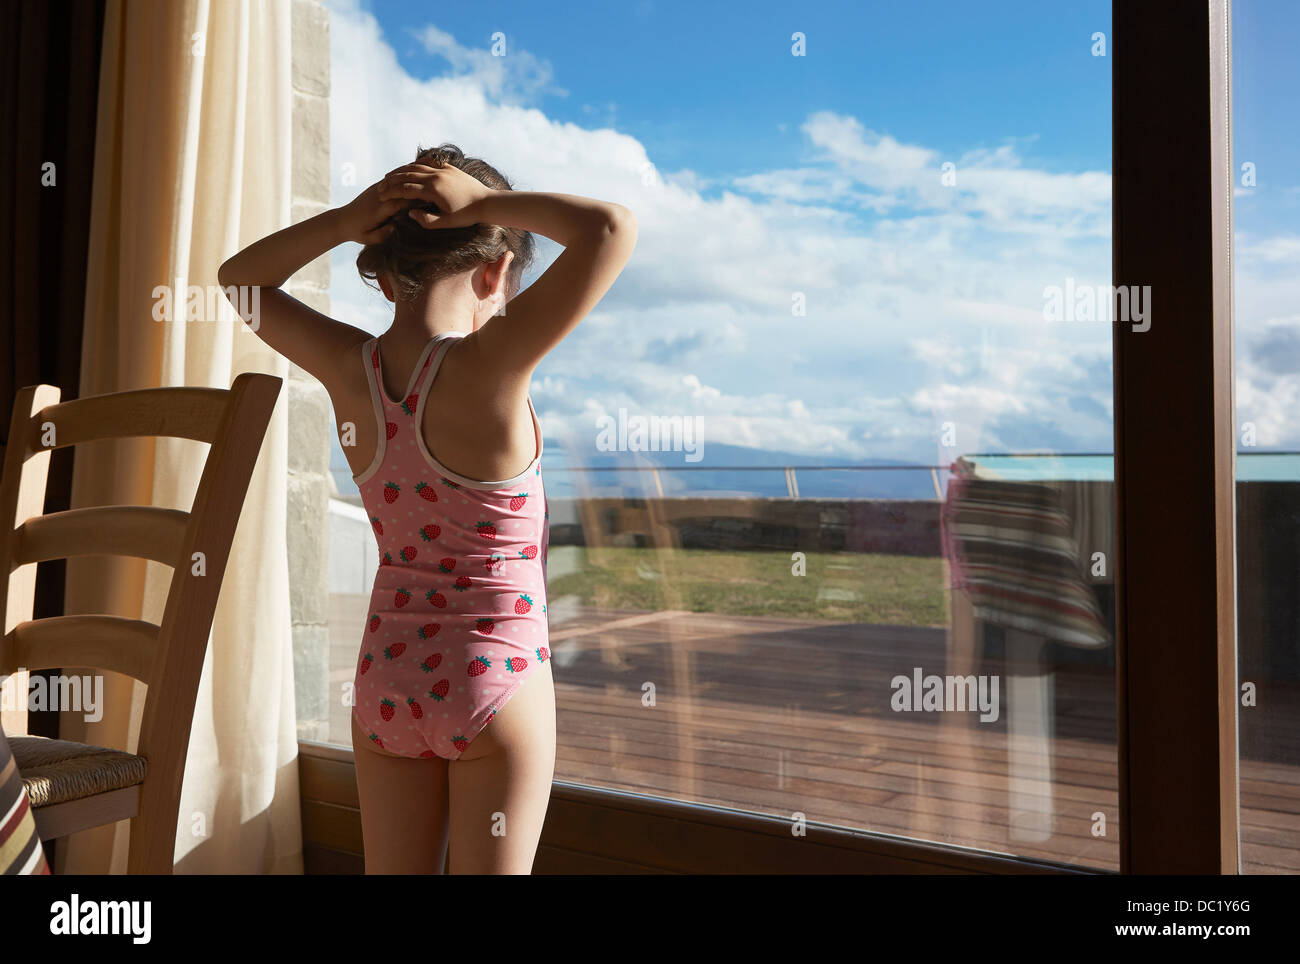 Young girl wearing bathing costume looking out of window Stock Photo